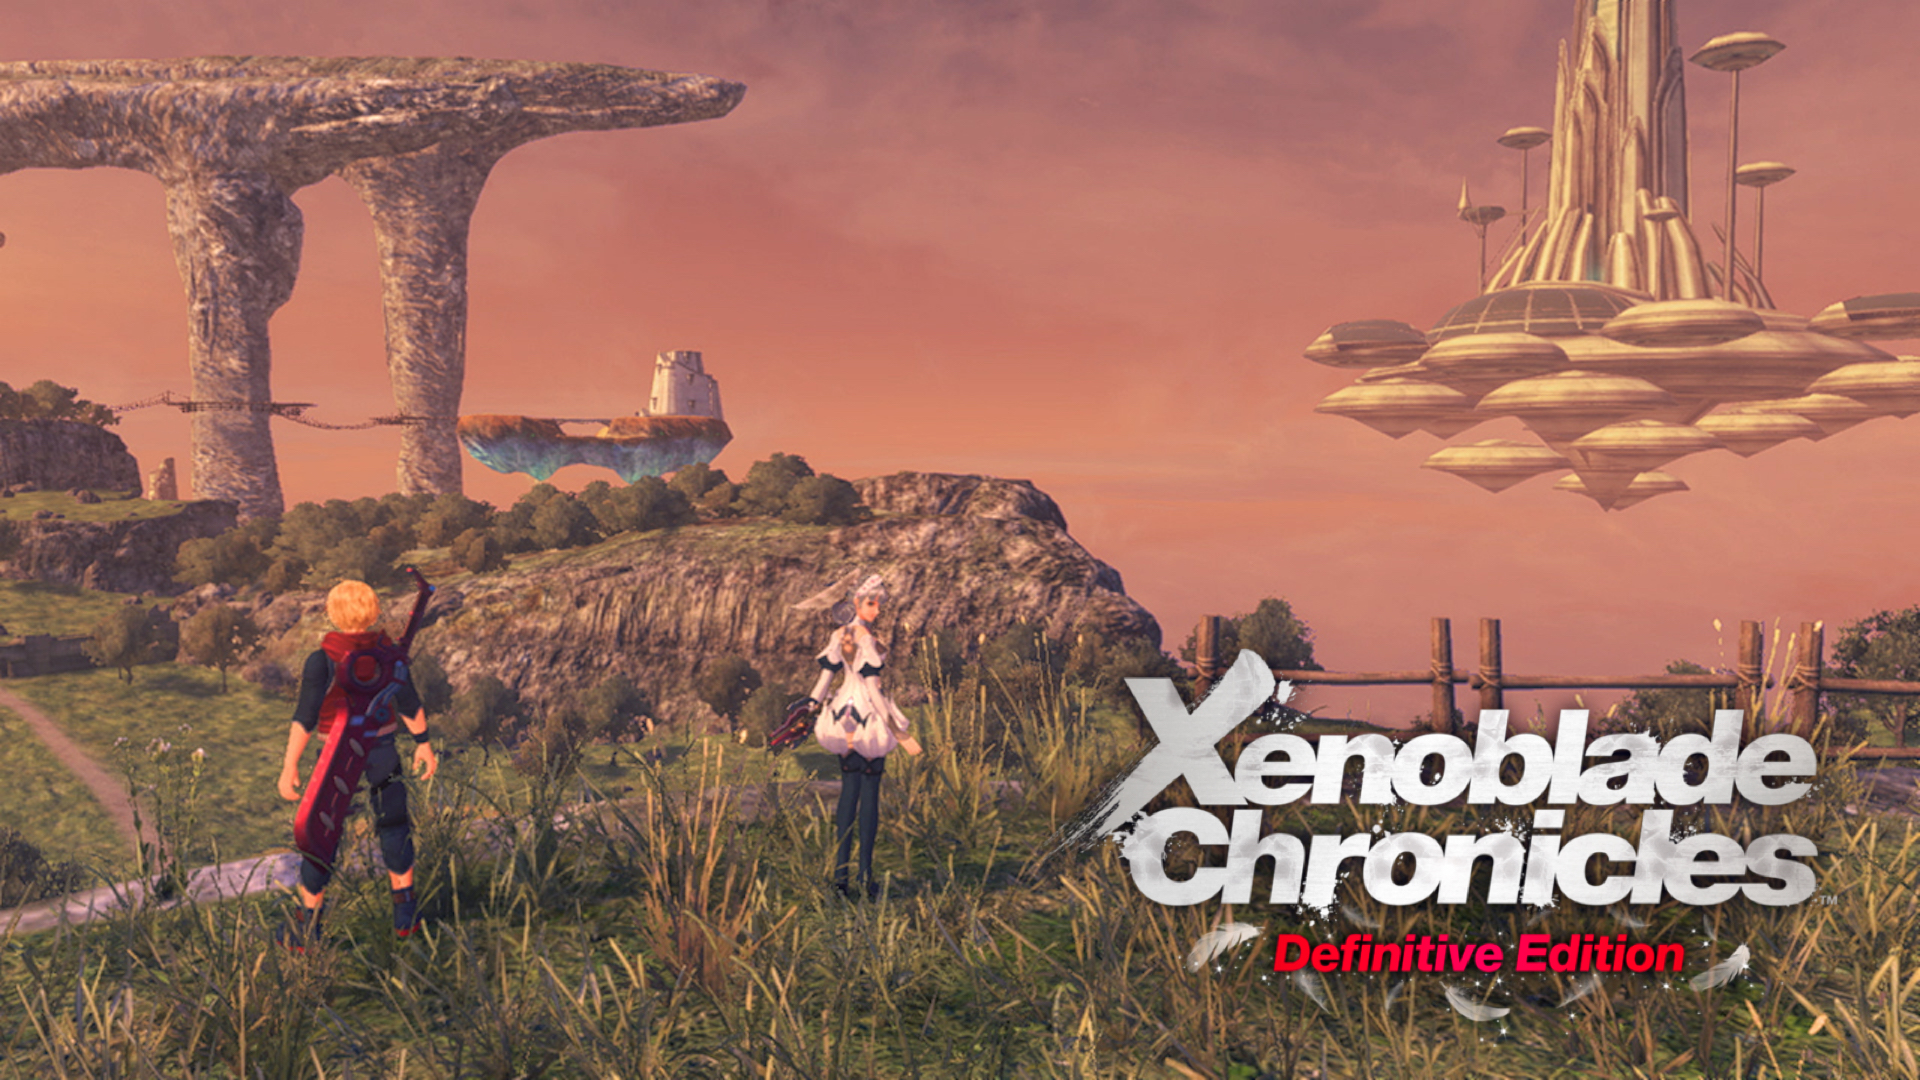 Xenoblade Chronicles Definitive Edition Has Been Rated by the ESRB